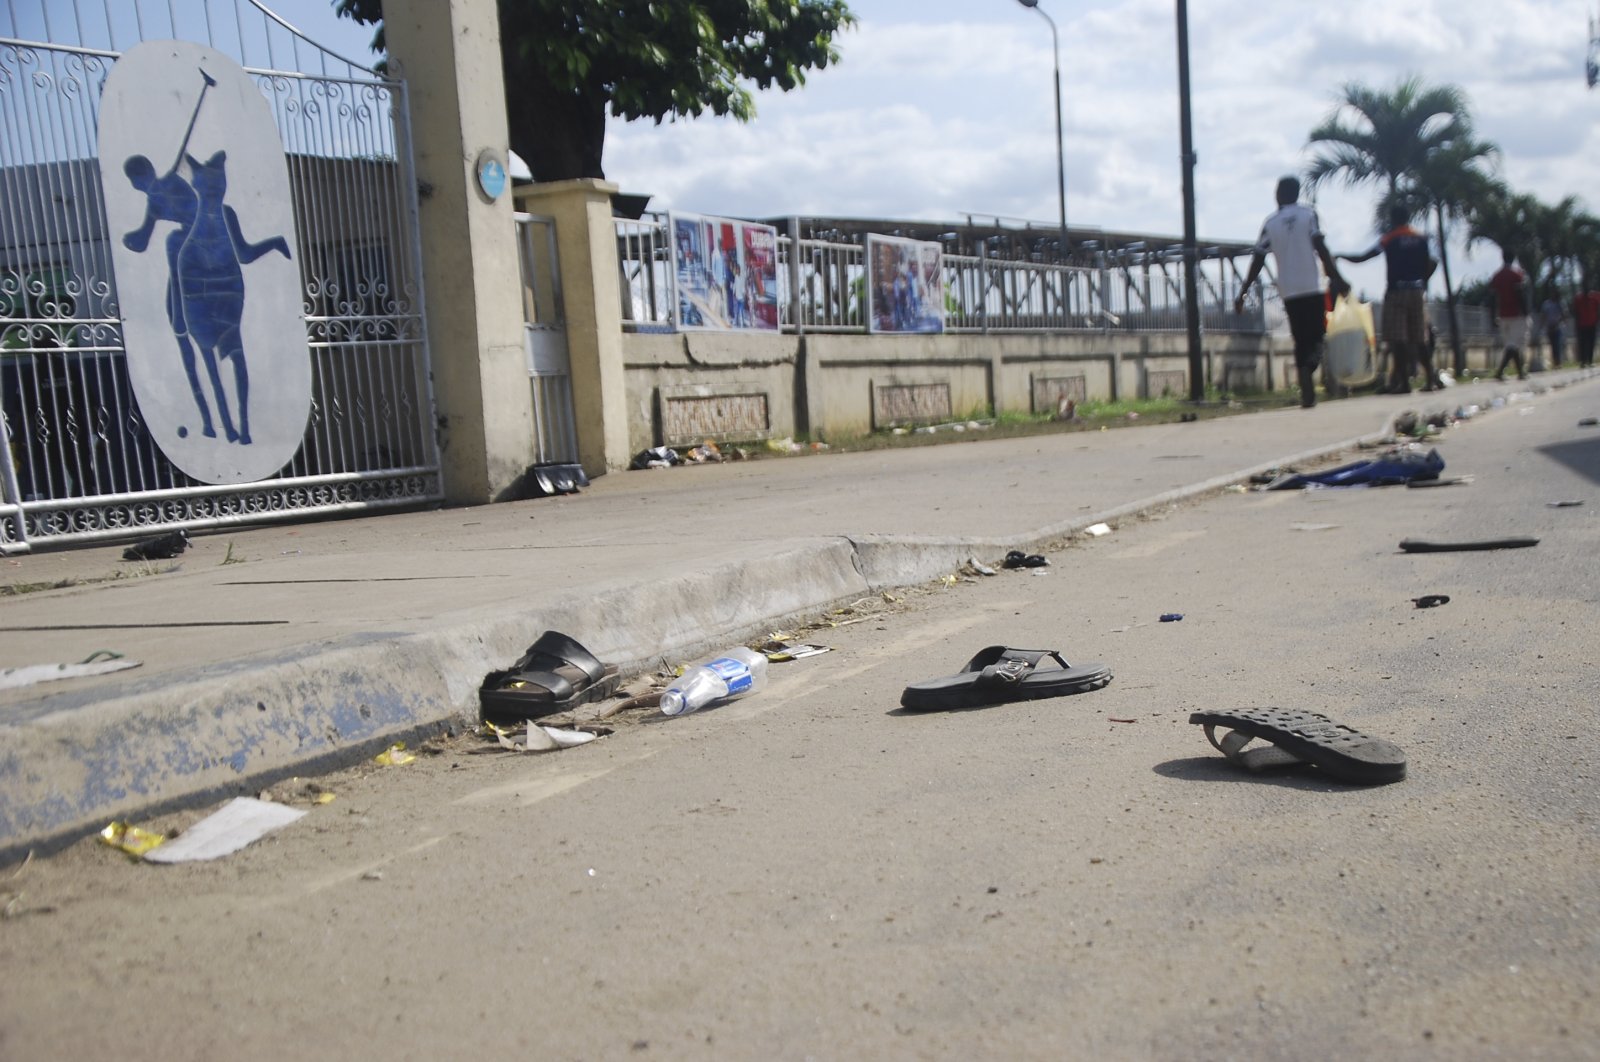 A view of flip fops and sandals on the street, following a stampede in Port Harcourt, Nigeria, May 28, 2022. (AP Photo)